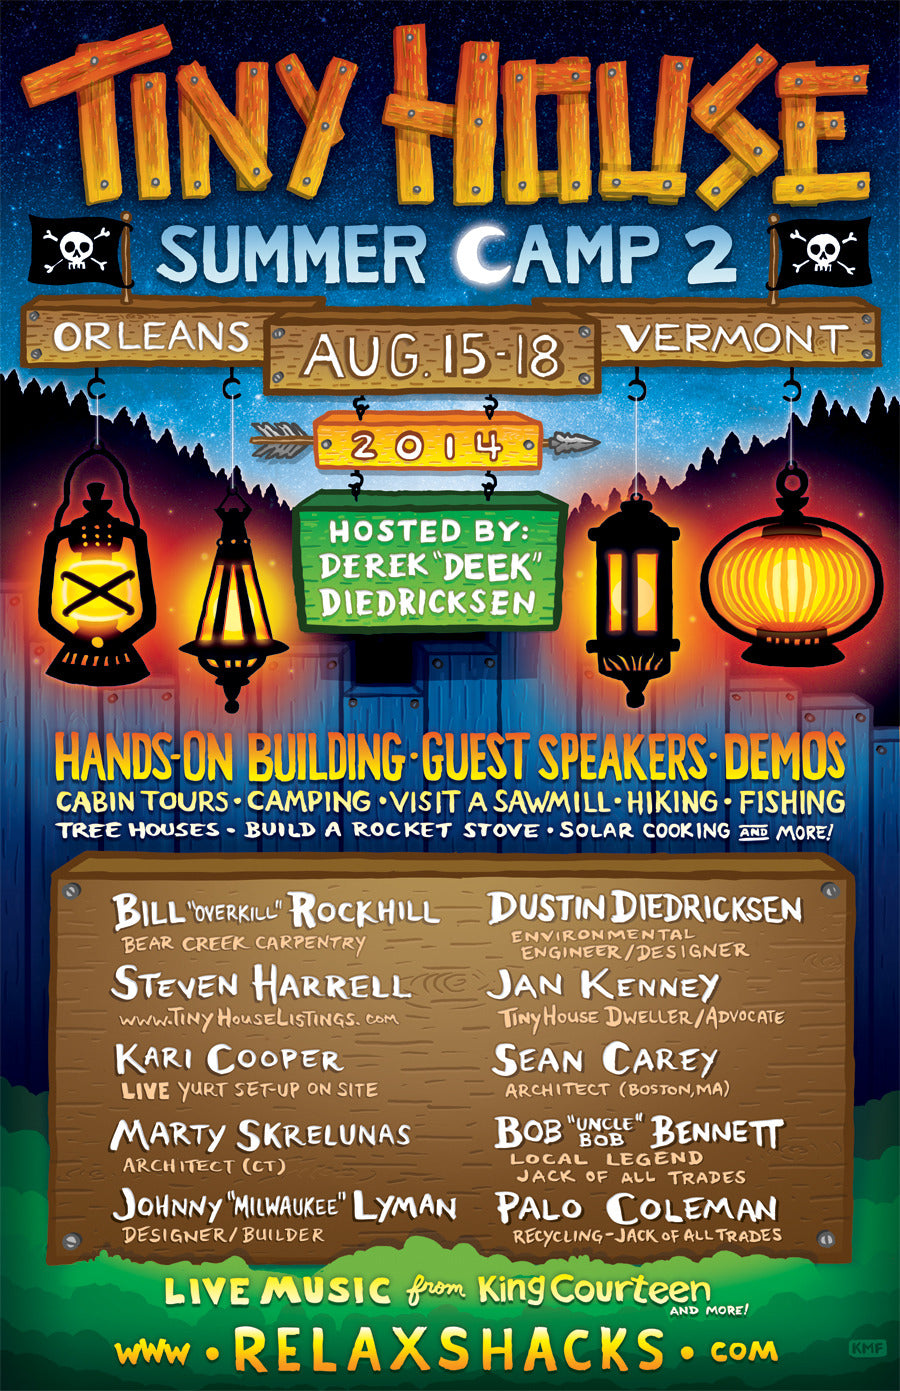 Relax Shacks - Tiny House Summer Camp 2 Event Poster